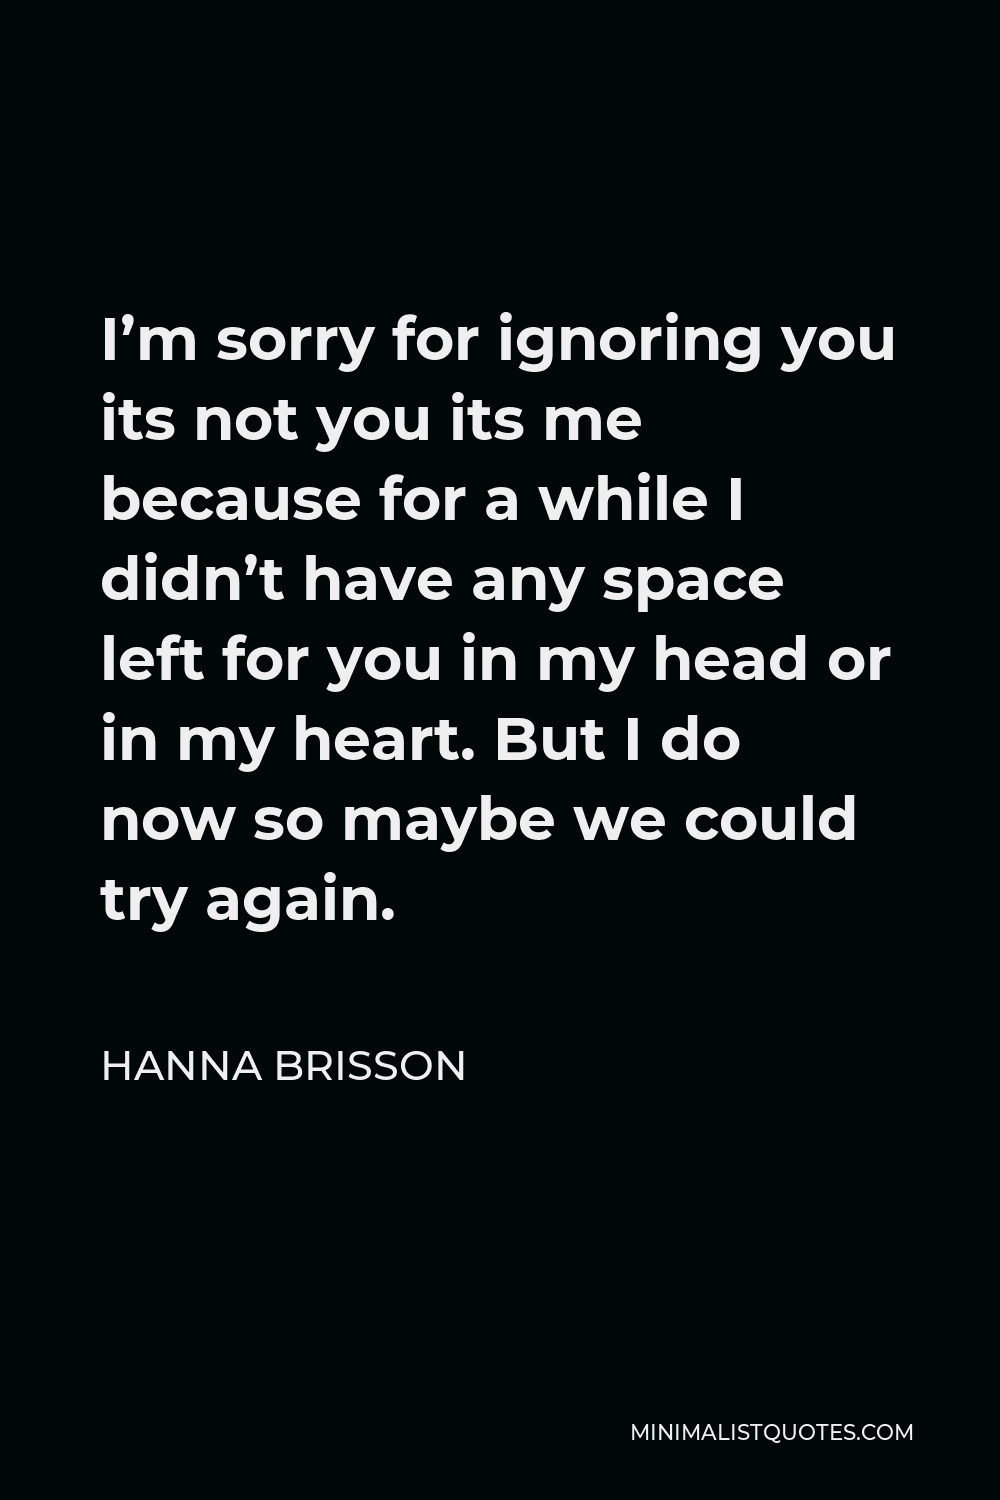 Hanna Brisson Quote - I’m sorry for ignoring you its not you its me because for a while I didn’t have any space left for you in my head or in my heart. But I do now so maybe we could try again.